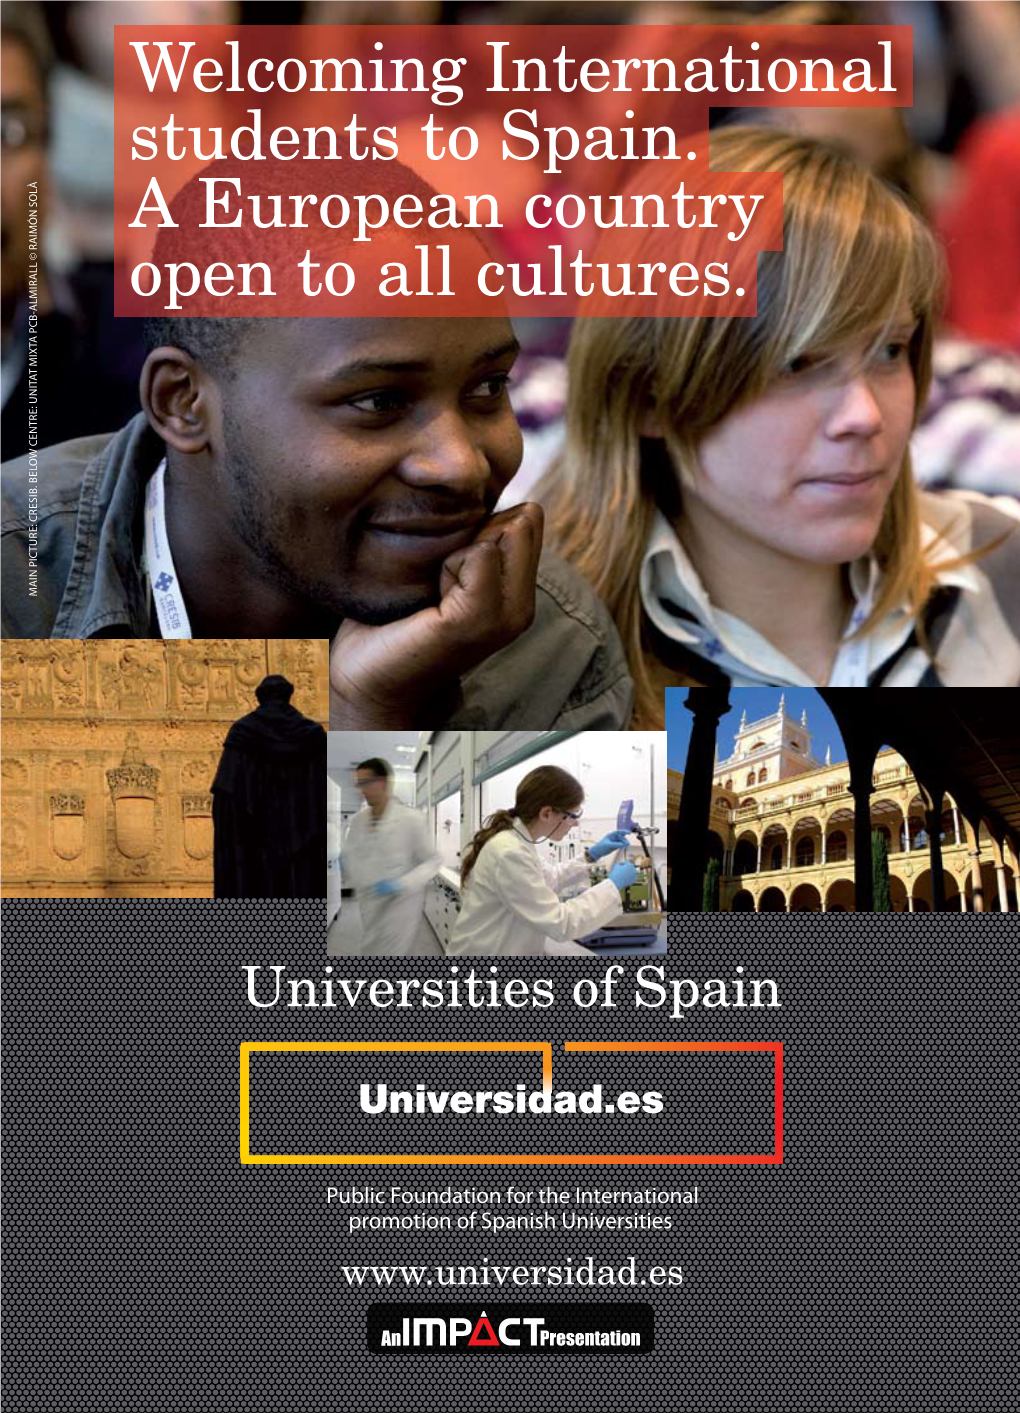 Alliance 4 Universities 4 Spanish Leading Universities Alliance Four U! for Study and Research in Europe